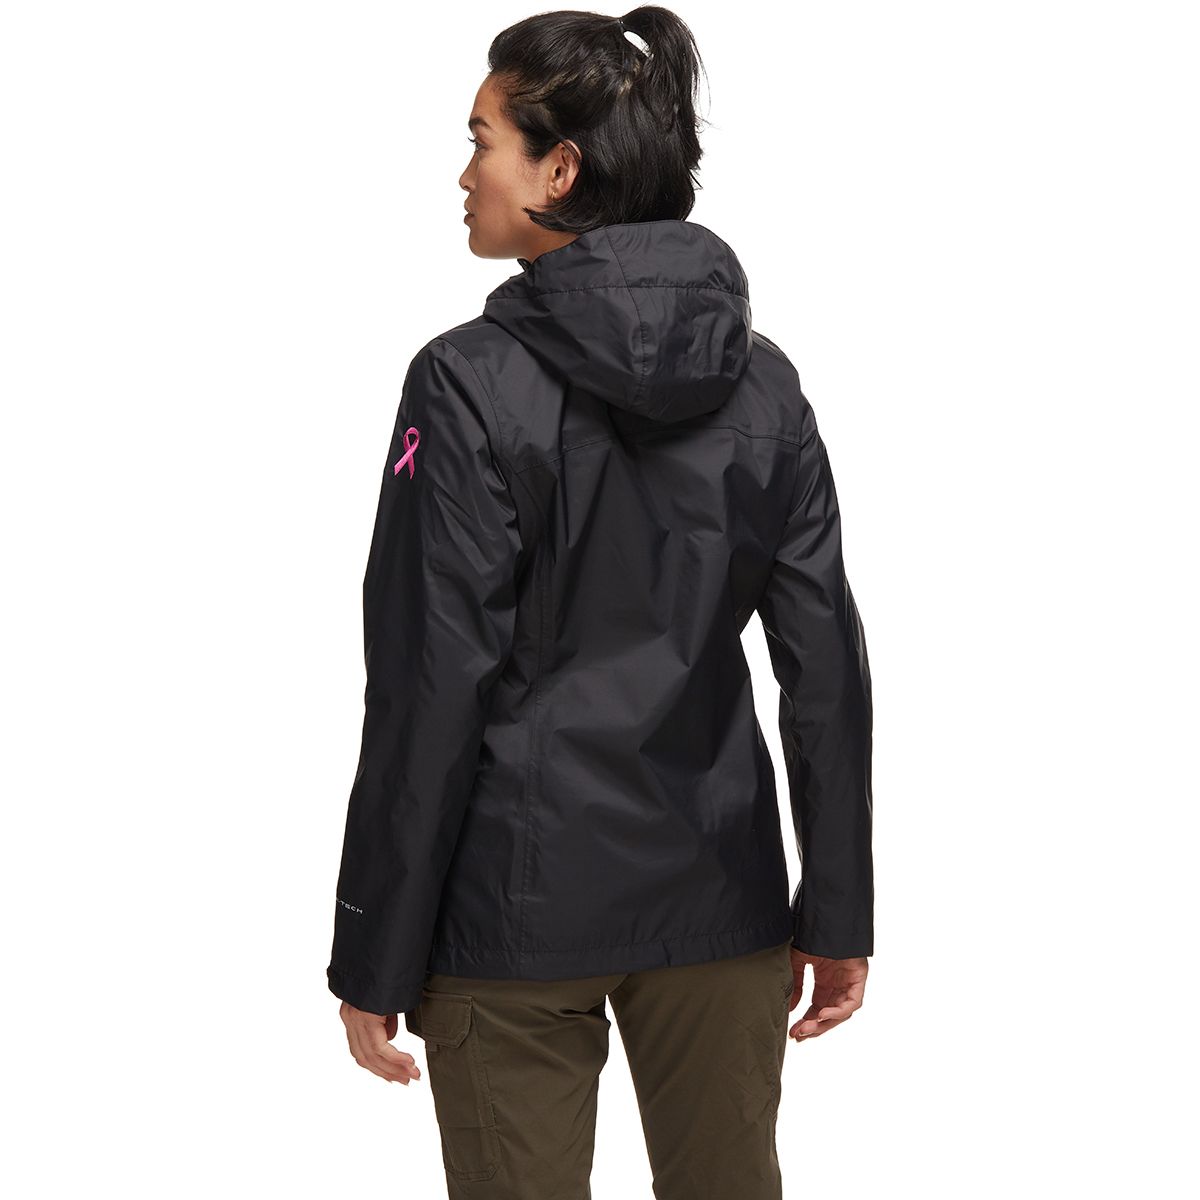 columbia tested tough in pink rain jacket